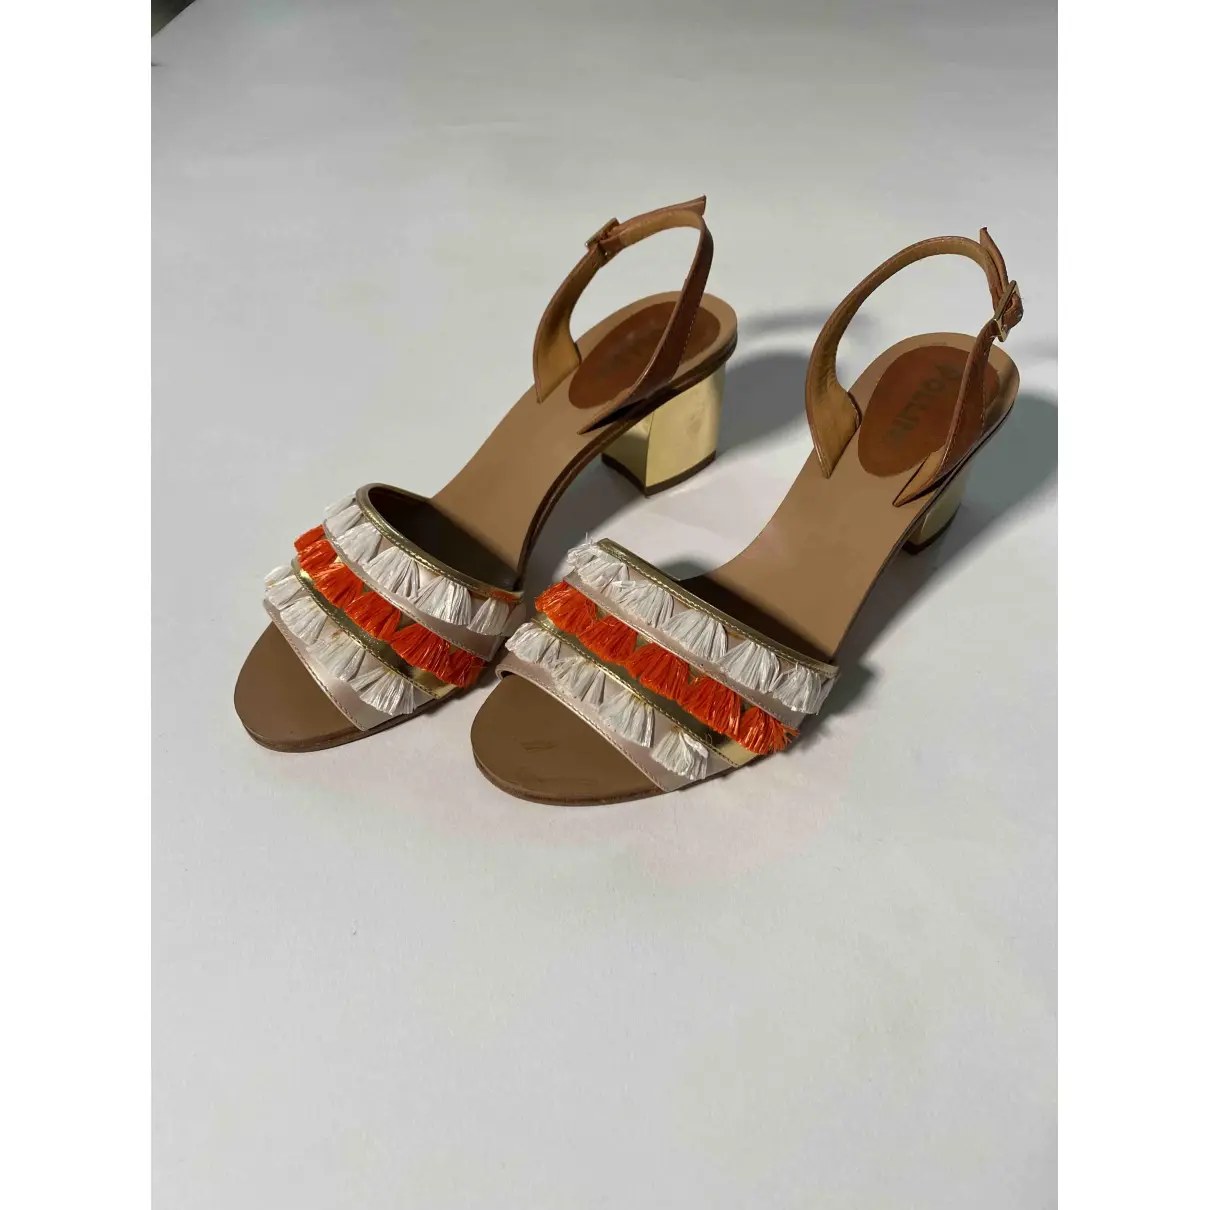 Buy Pollini Leather sandals online